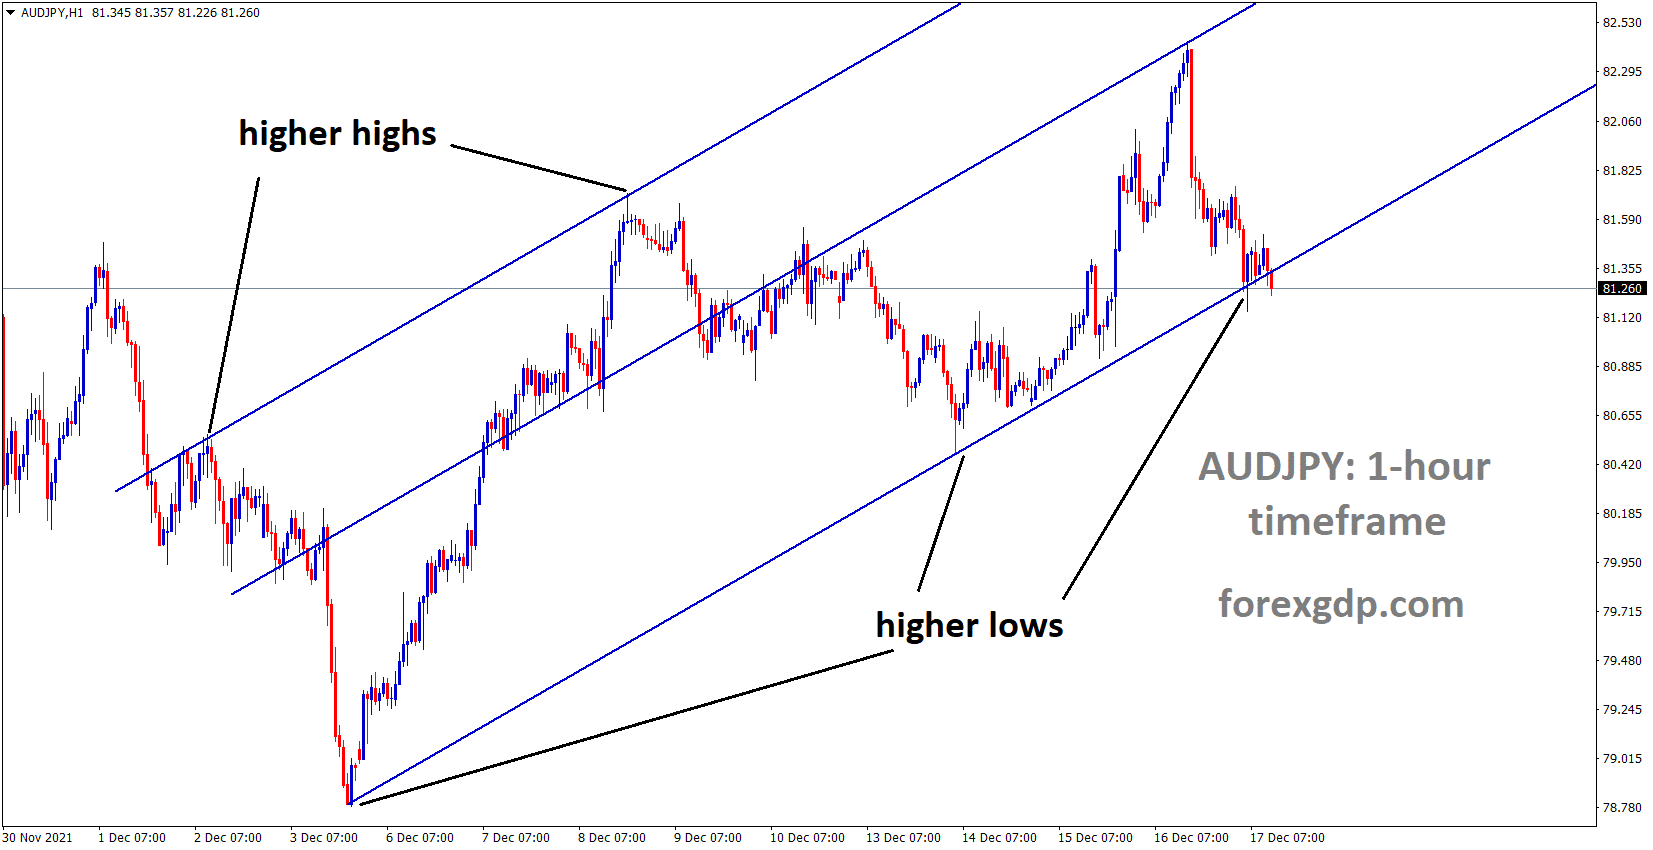 AUDJPY is moving in an Ascending channel and the market reached the higher low area of the channel